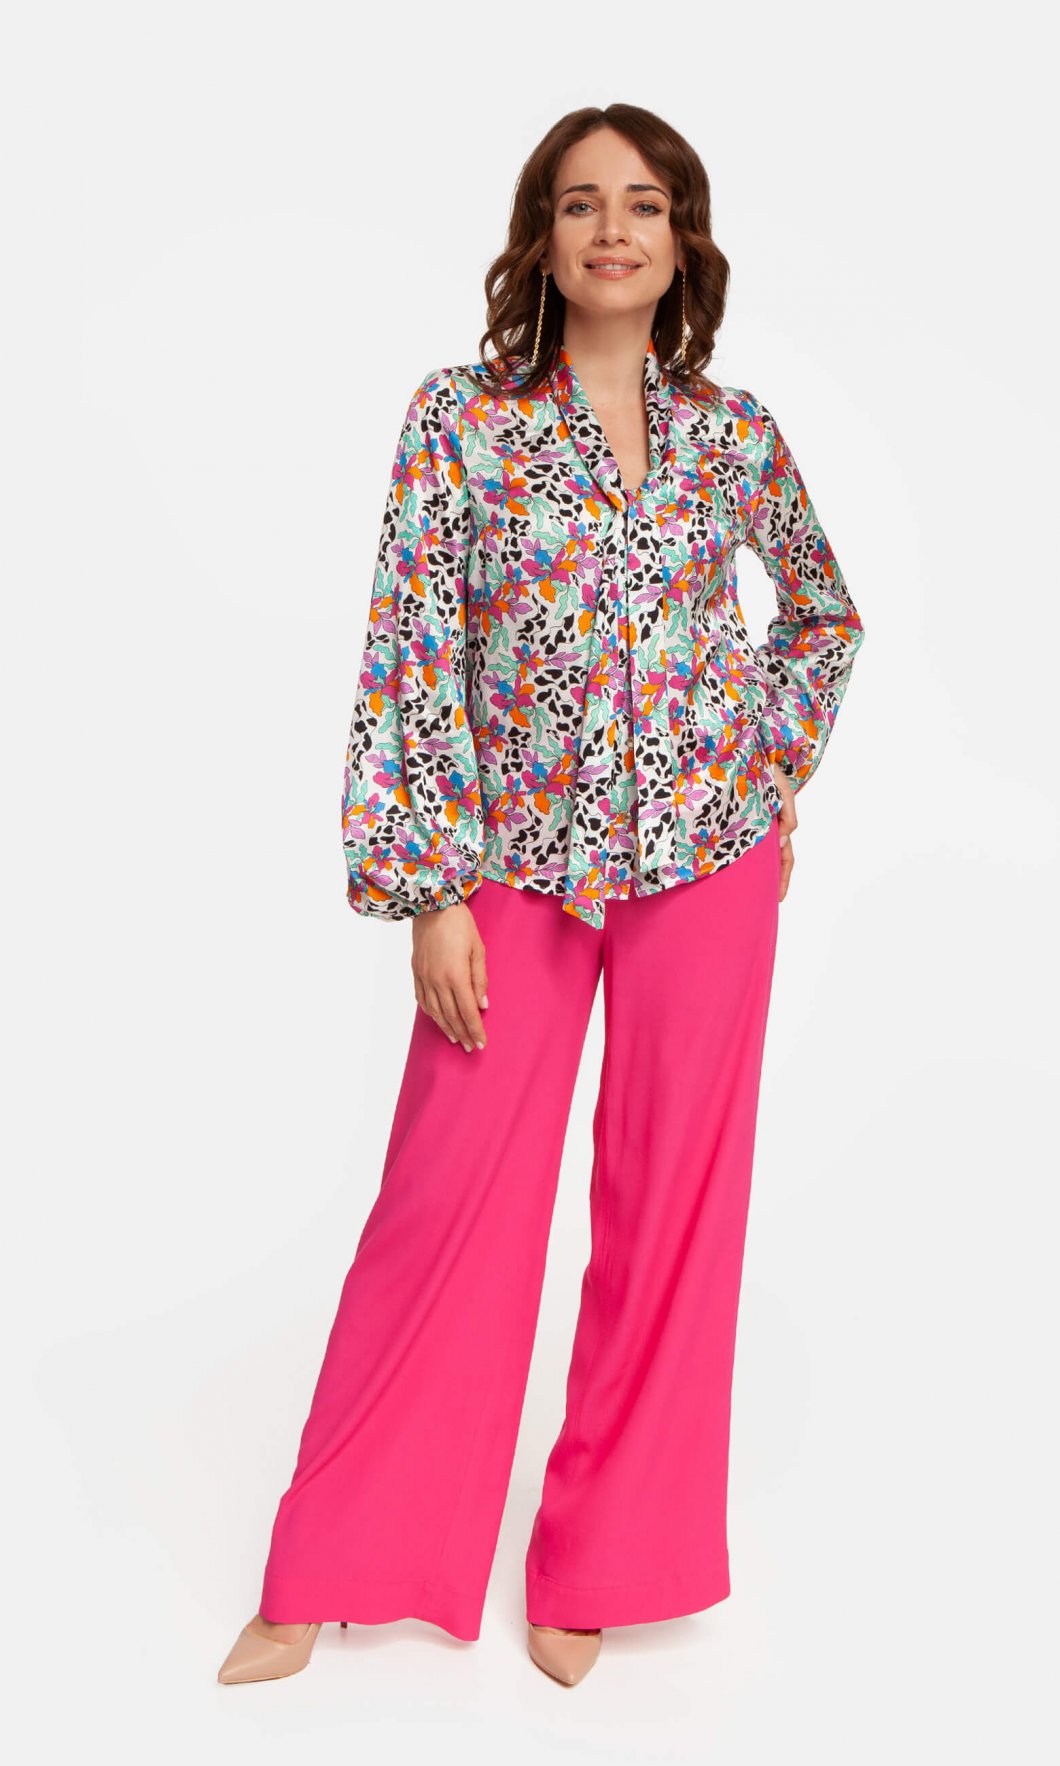 MILENA shirt - with pink accents